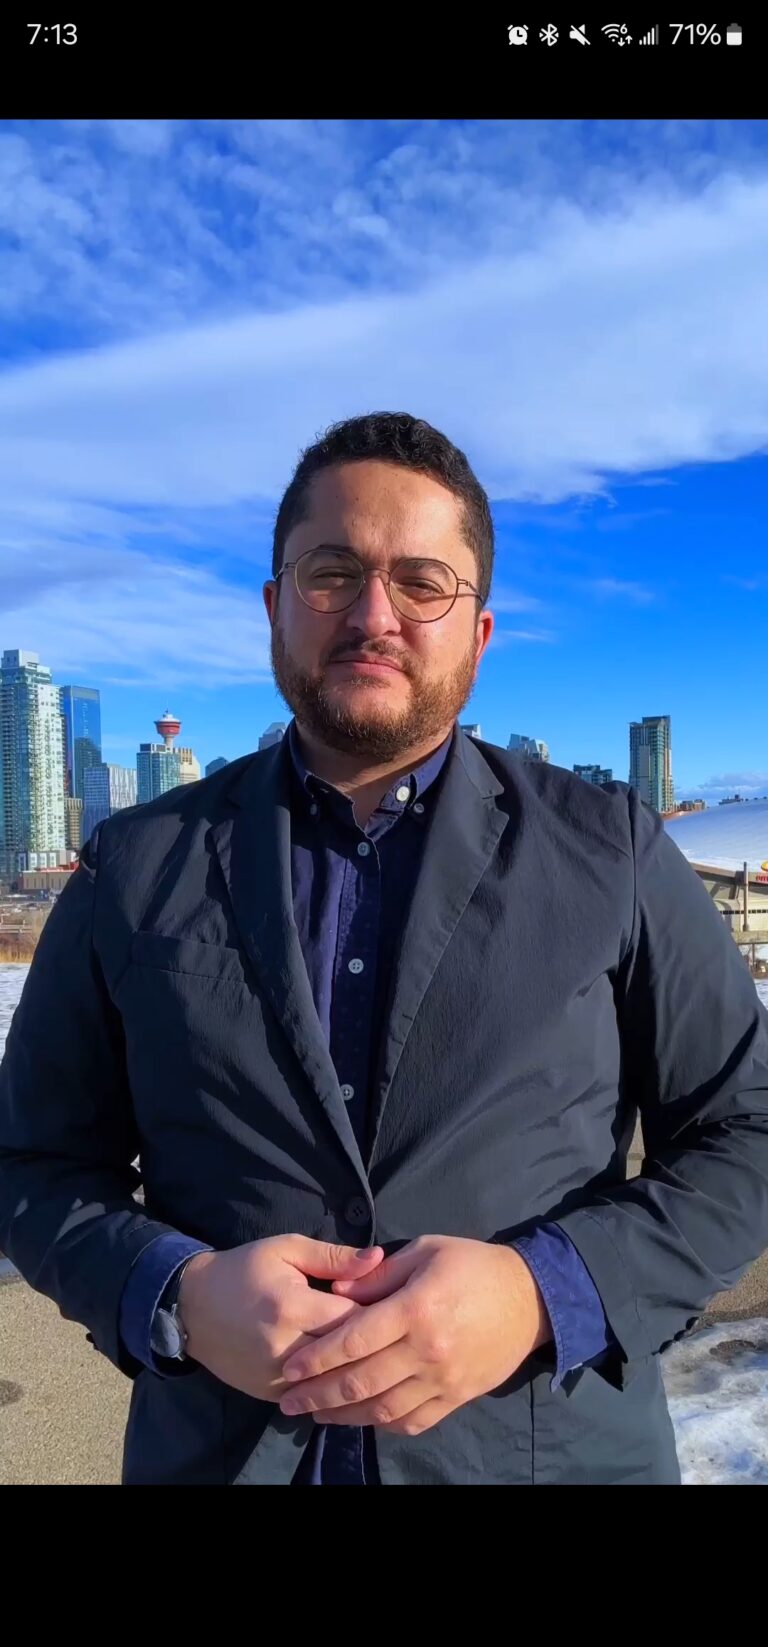 → CLICK HERE FOR VIDEO: "He embodies these universal values, and understands the spirit of Calgary."